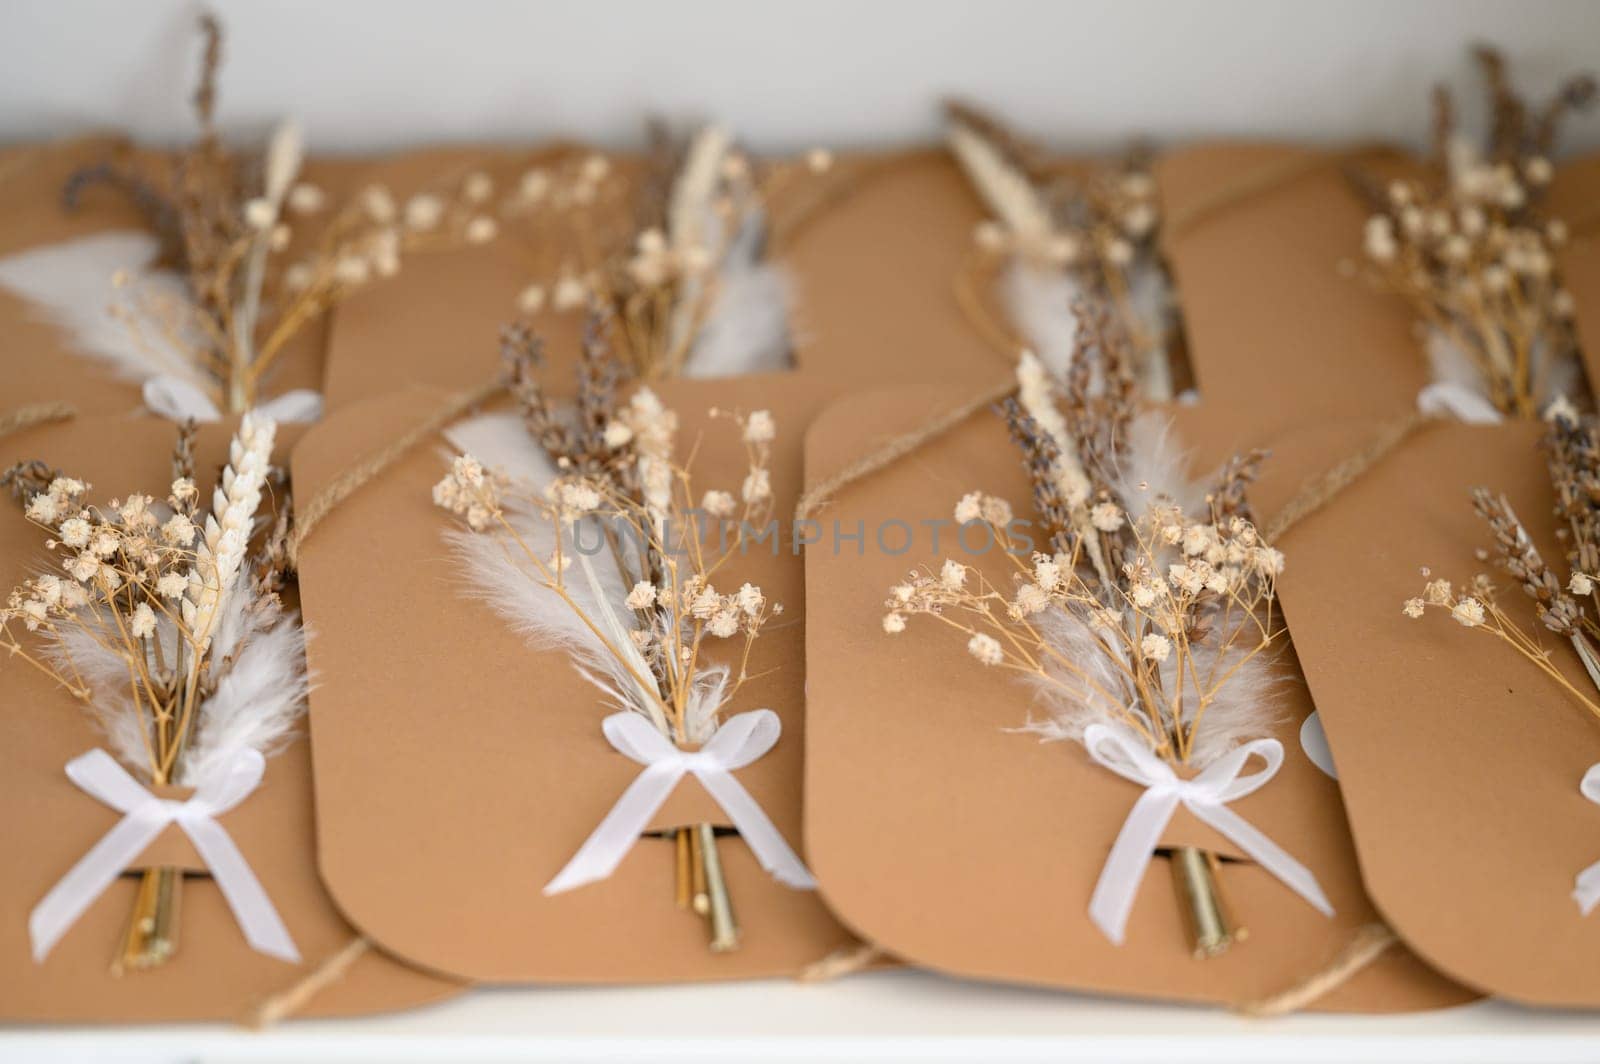 Gift cards with ikibana of dried flowers, brown paper cards.